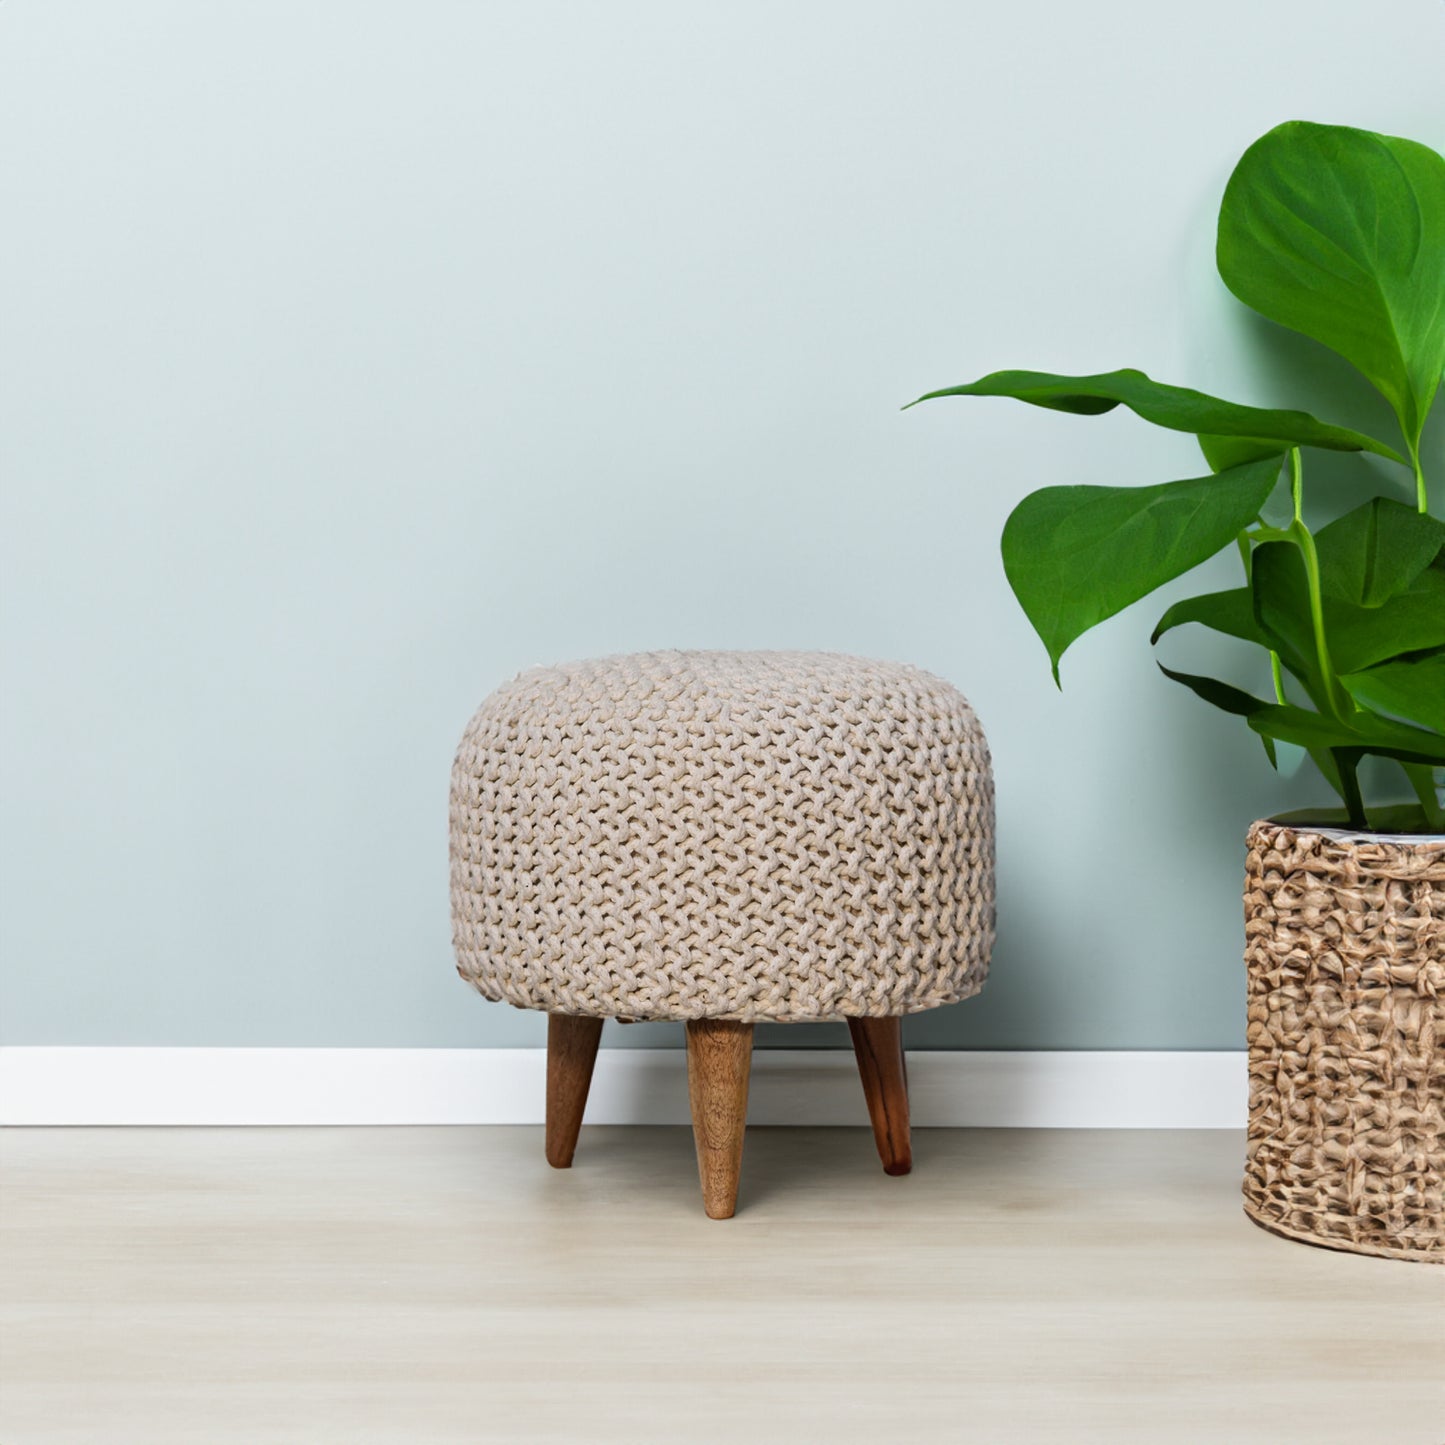 Off White Knitted Round Footstool in Oak Finish With Luxurious Cushioned Upholstery